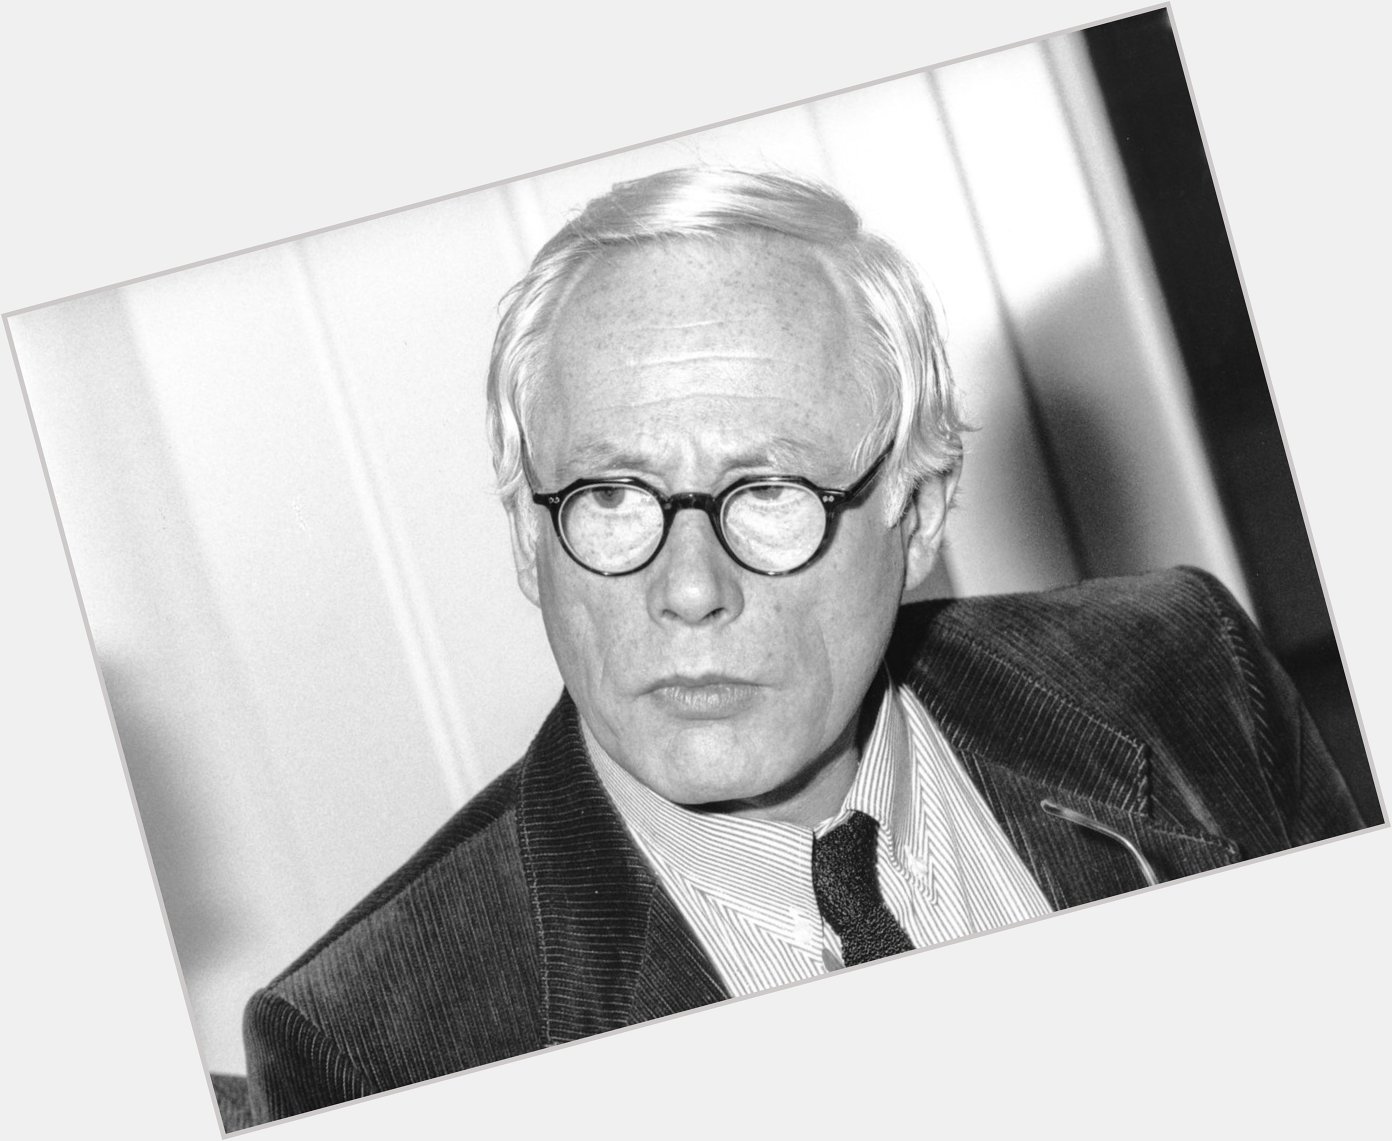 A wonderful and very happy birthday to one of the most influential designers of our time: Dieter Rams!  